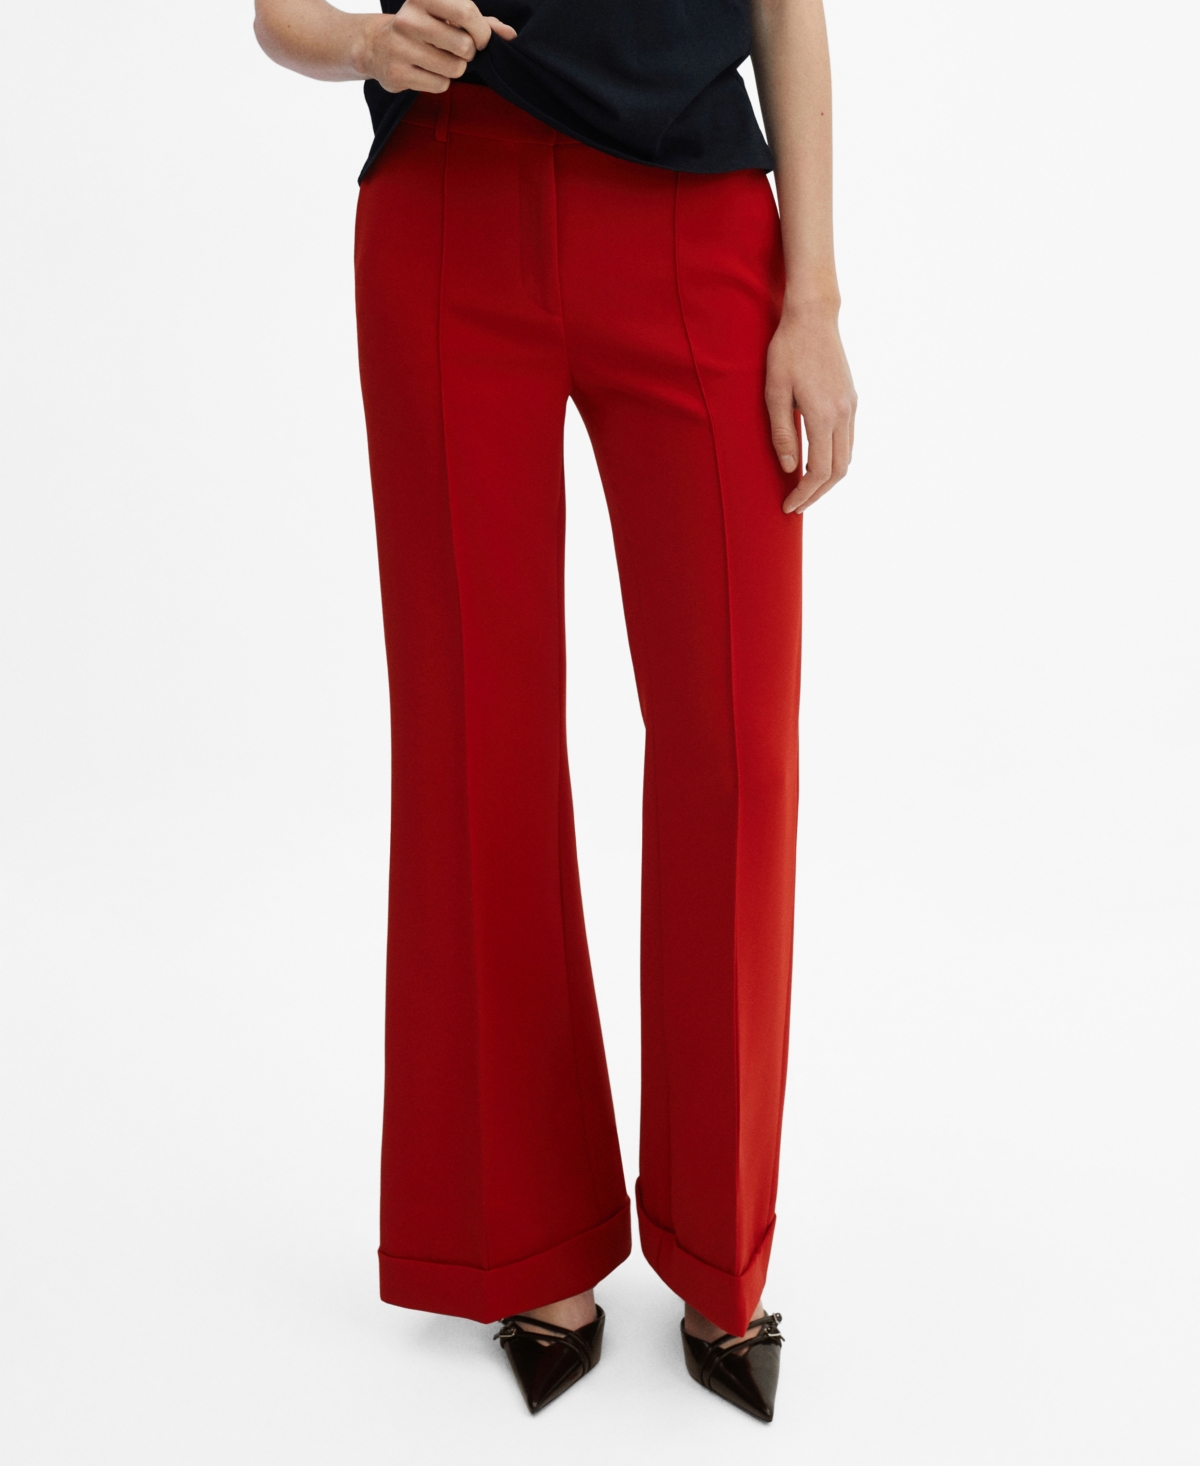 Mango Women's Mid-rise Flared Pants In Red